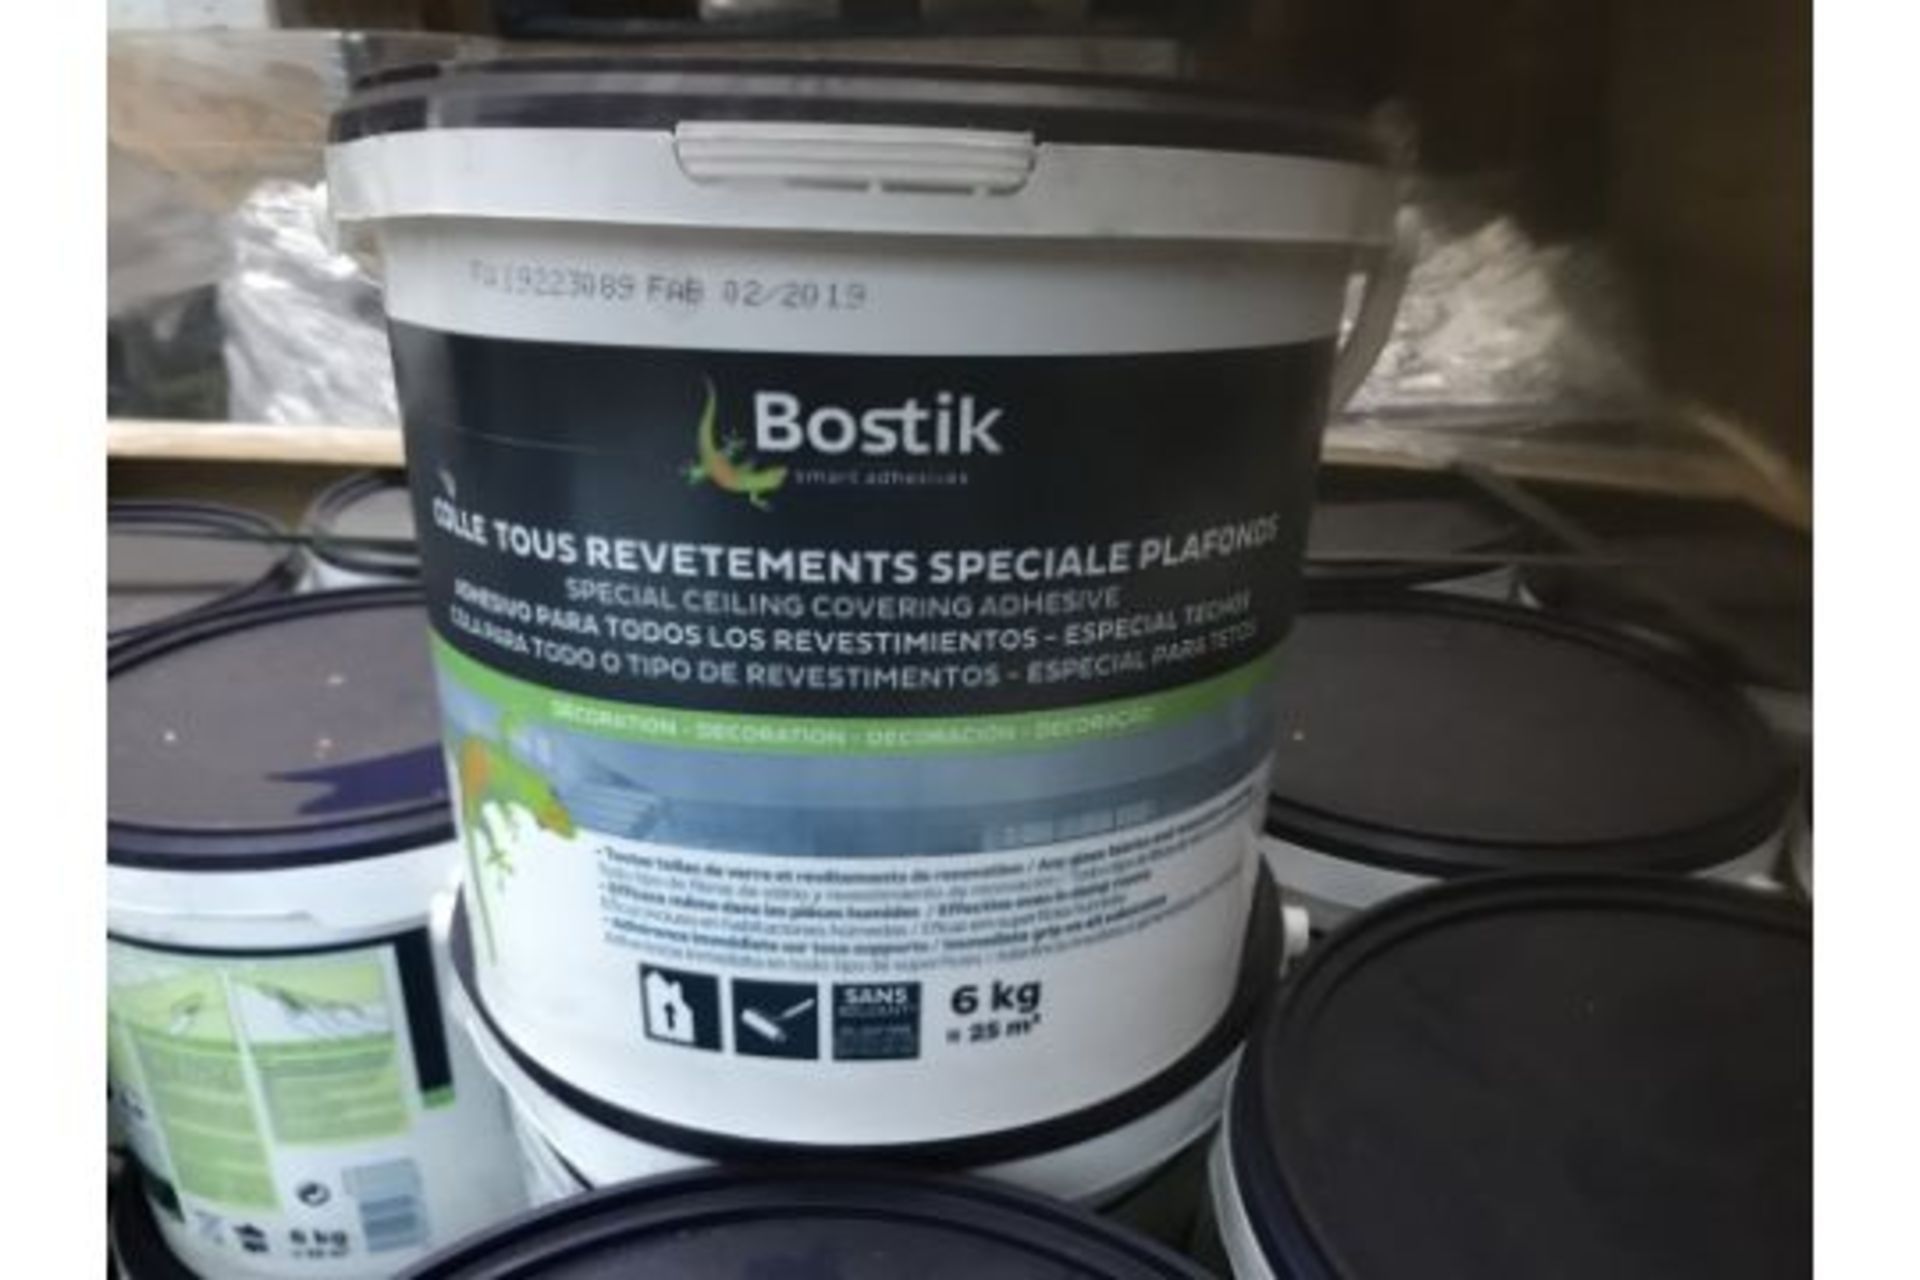 PALLET TO CONTAIN 50 x 6KG BOSTIK SPECIAL CEILING COVERING ADHESIVE